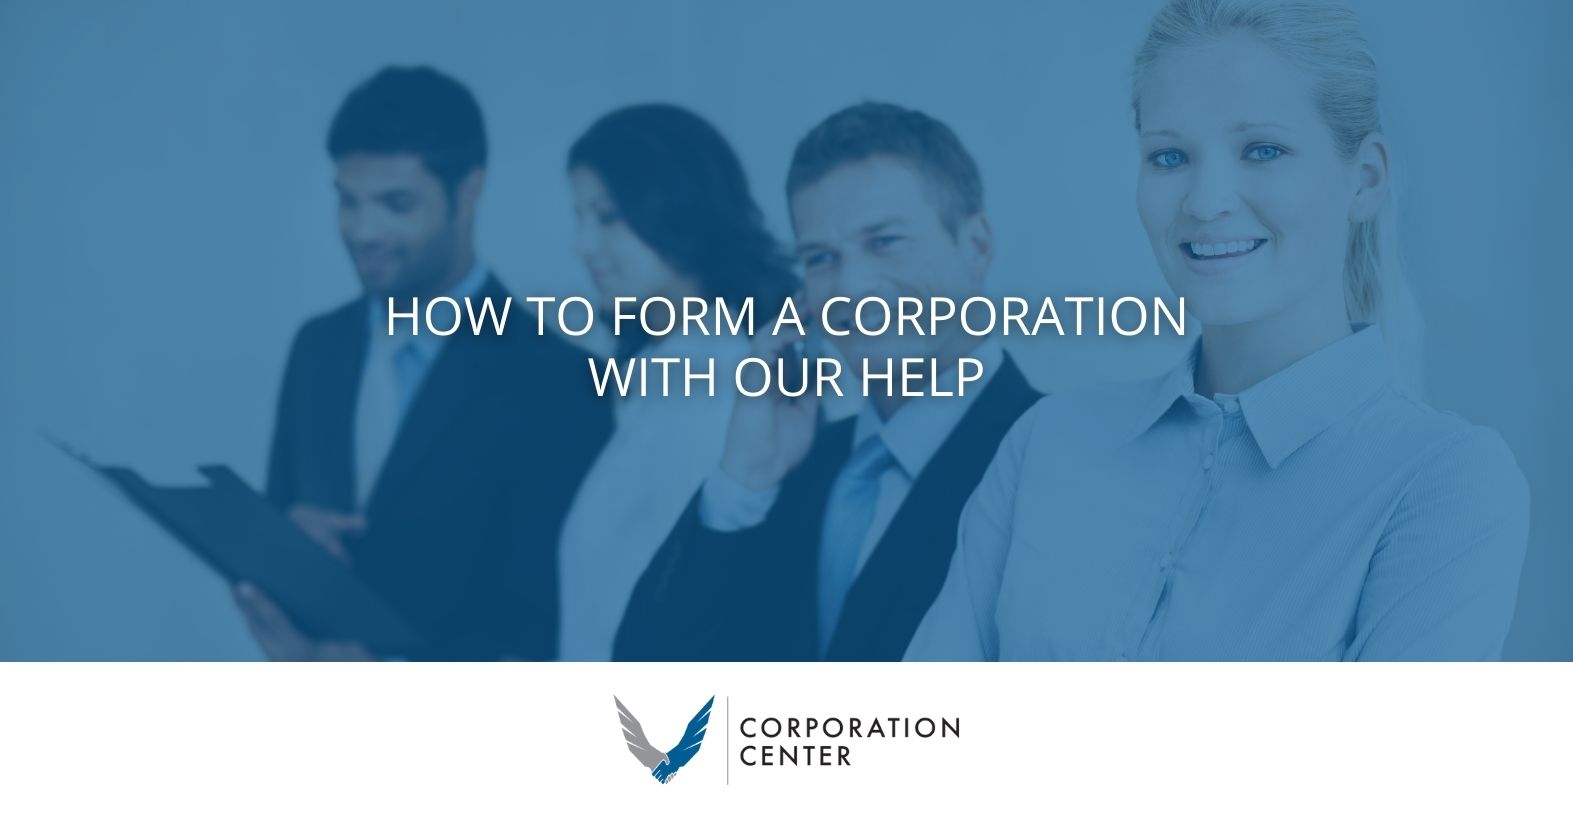 How To Form a Corporation